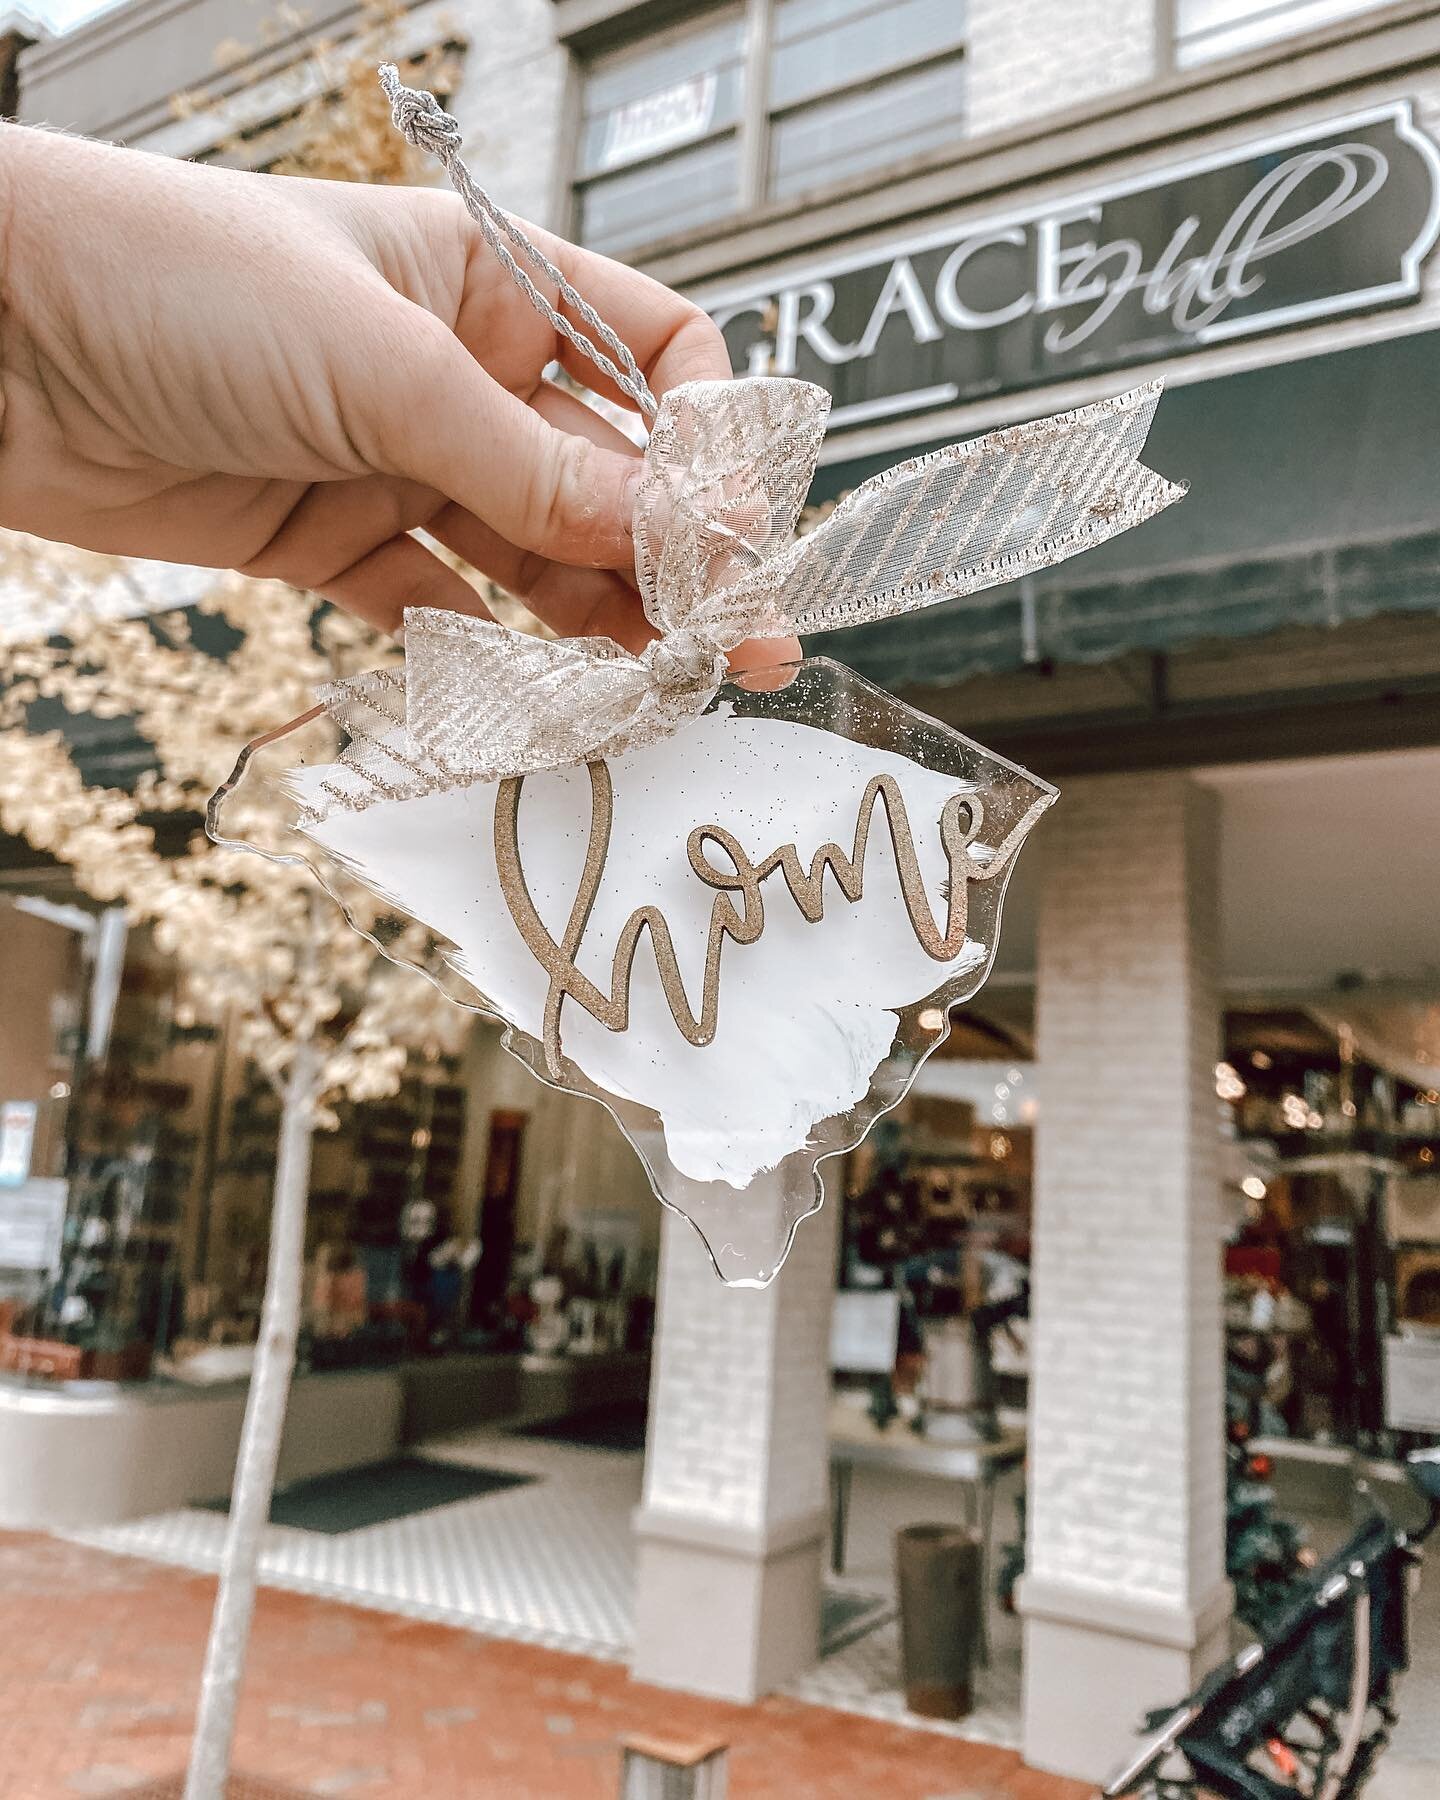 If you&rsquo;re local, come see us today at @vintagefestmarkets in downtown Greer! Here until 4pm ❤️
.
.
I have quite an update for everyone (explaining my lack of connection here ☺️❤️) but all is well and I&rsquo;m thankful to have some new ornament